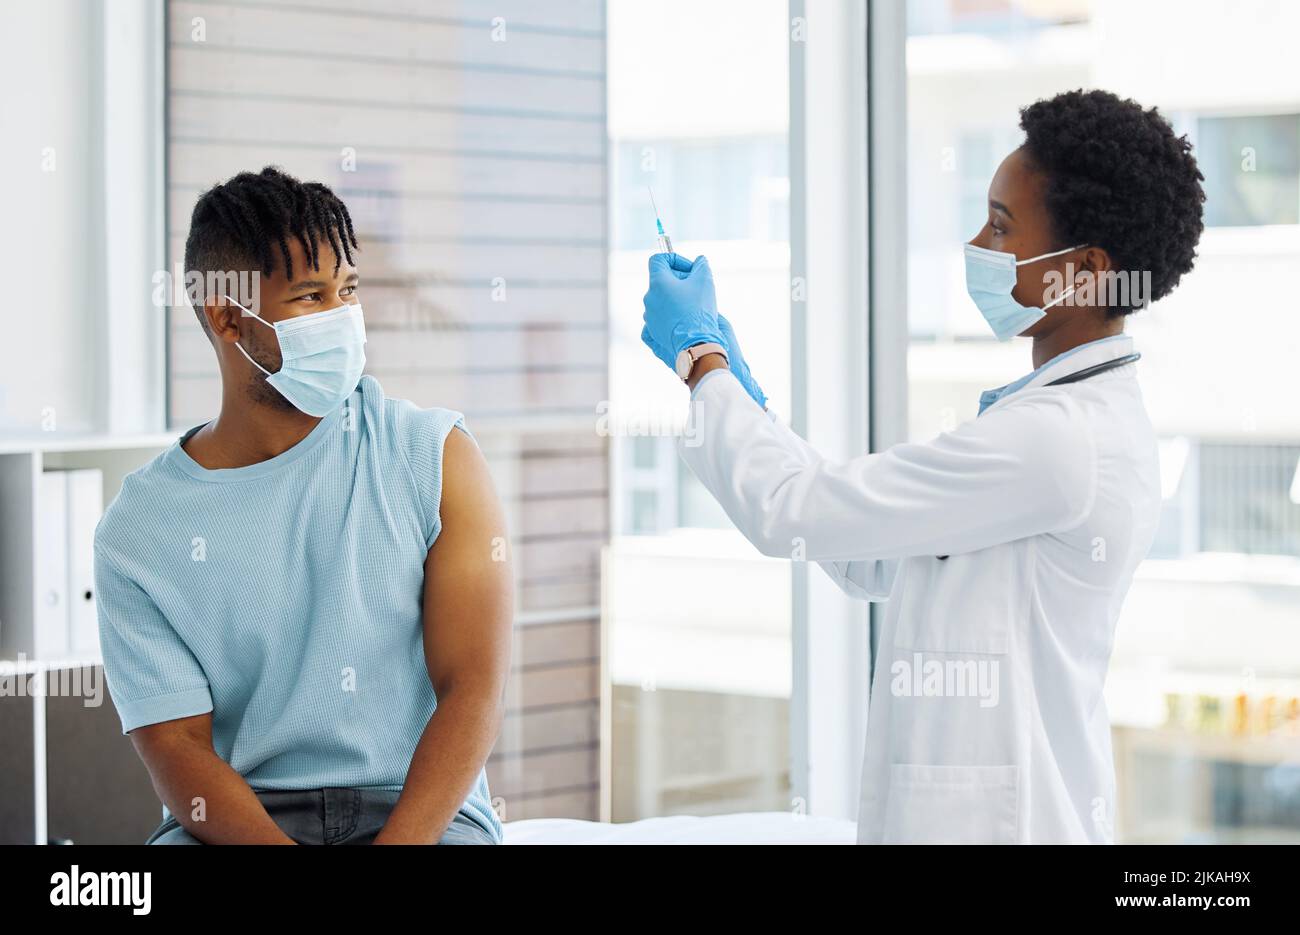 Ive been waiting for this treatment. a doctor about to inject the arm of a patient. Stock Photo